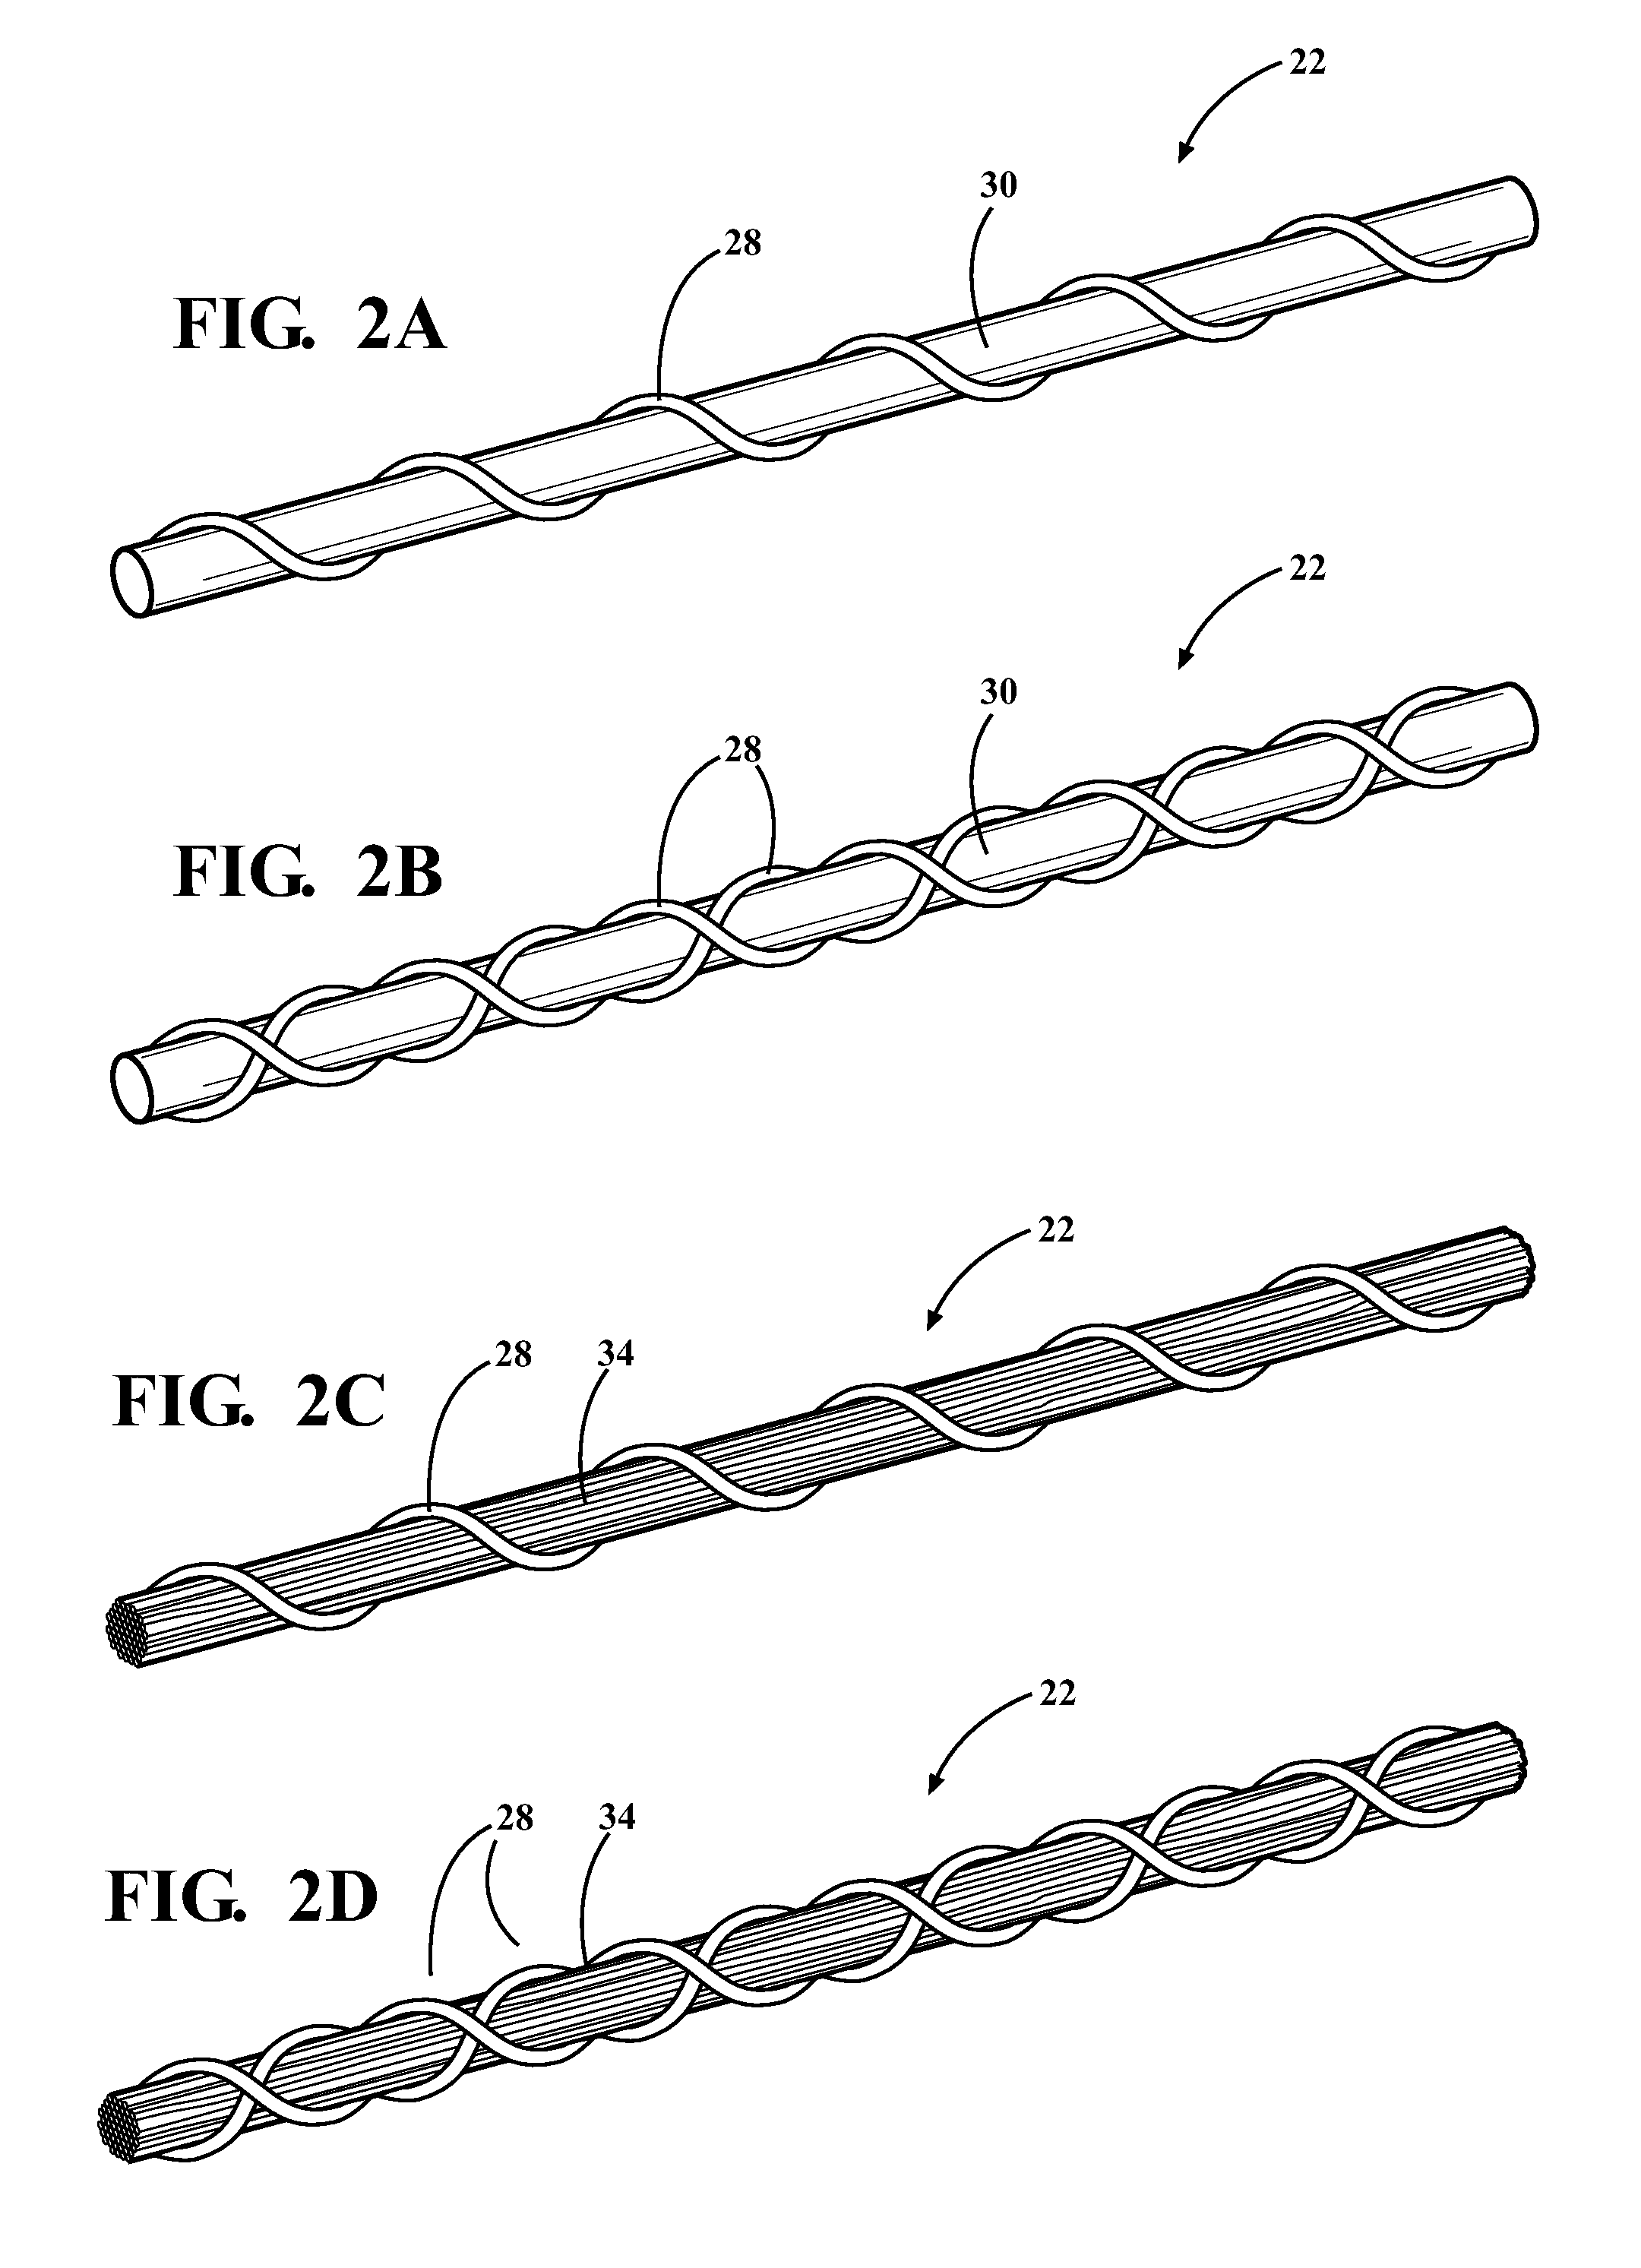 End-Fray Resistant Heat-Shrinkable Woven Sleeve, Assembly Therewith and Methods of Construction Thereof